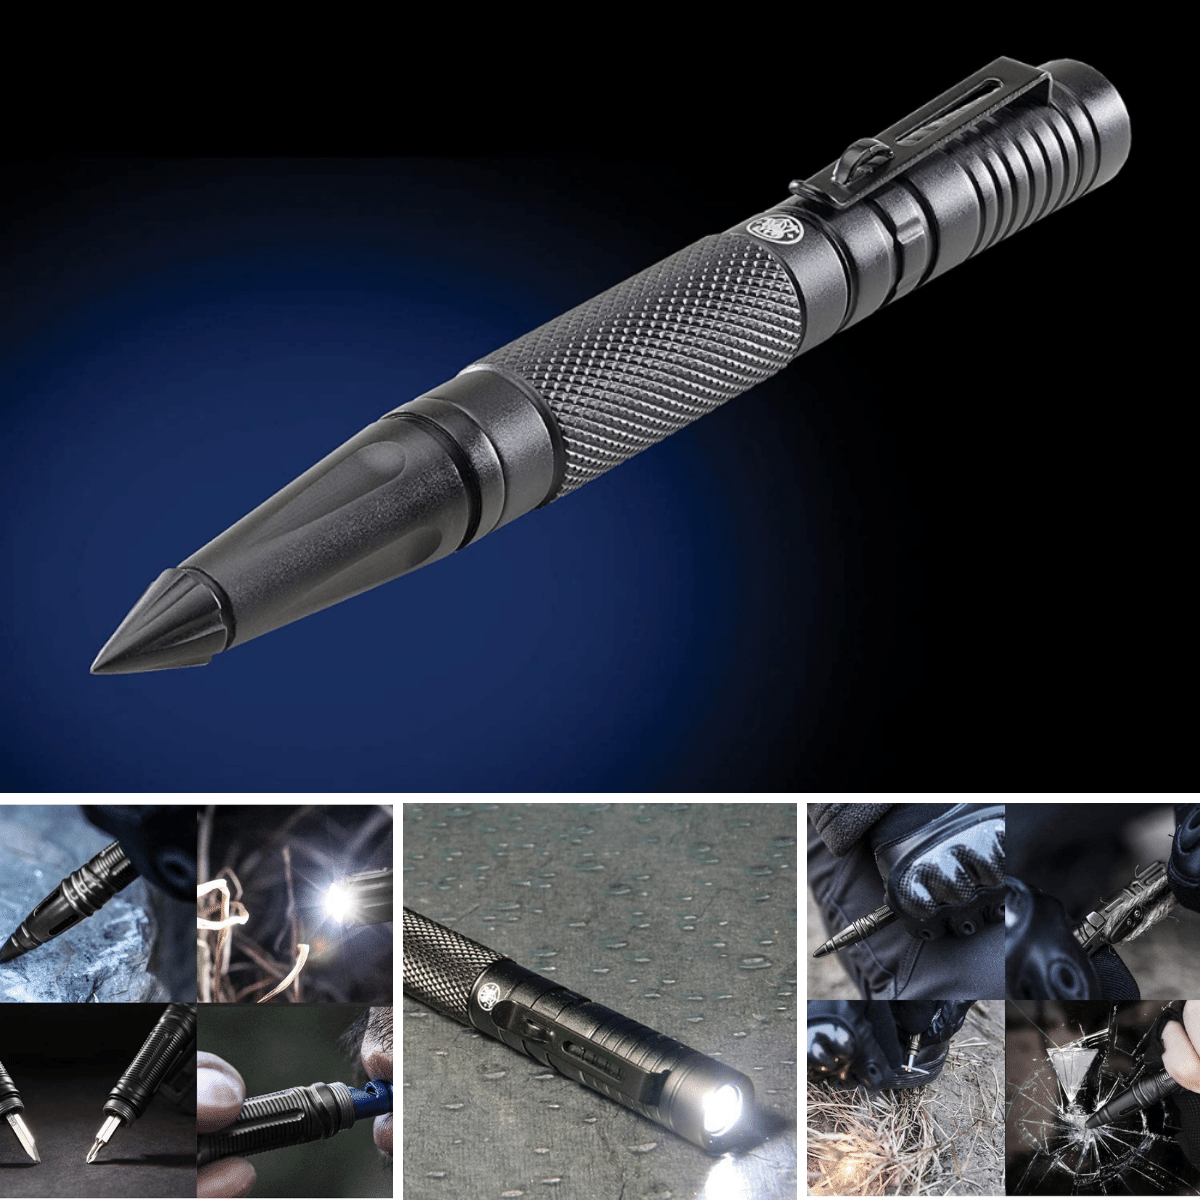 The tactical pen being used for glass breakage, writing and as a whistle along with the flashlight